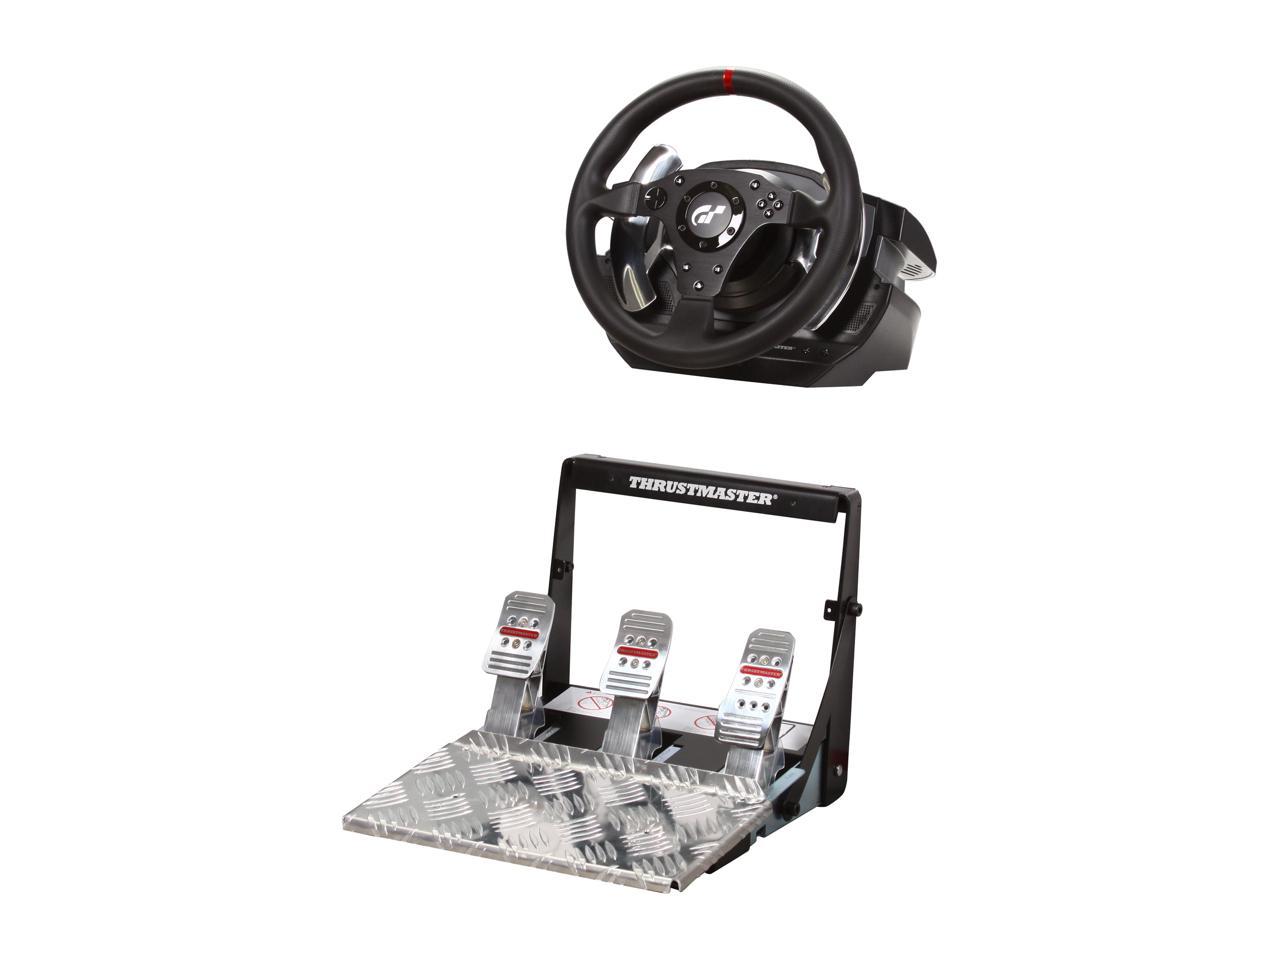 Thrustmaster t500rs. Трастмастер 818. Thrustmaster t300 и Moza 5. Thrustmaster t500rs КПП. Thrustmaster t500